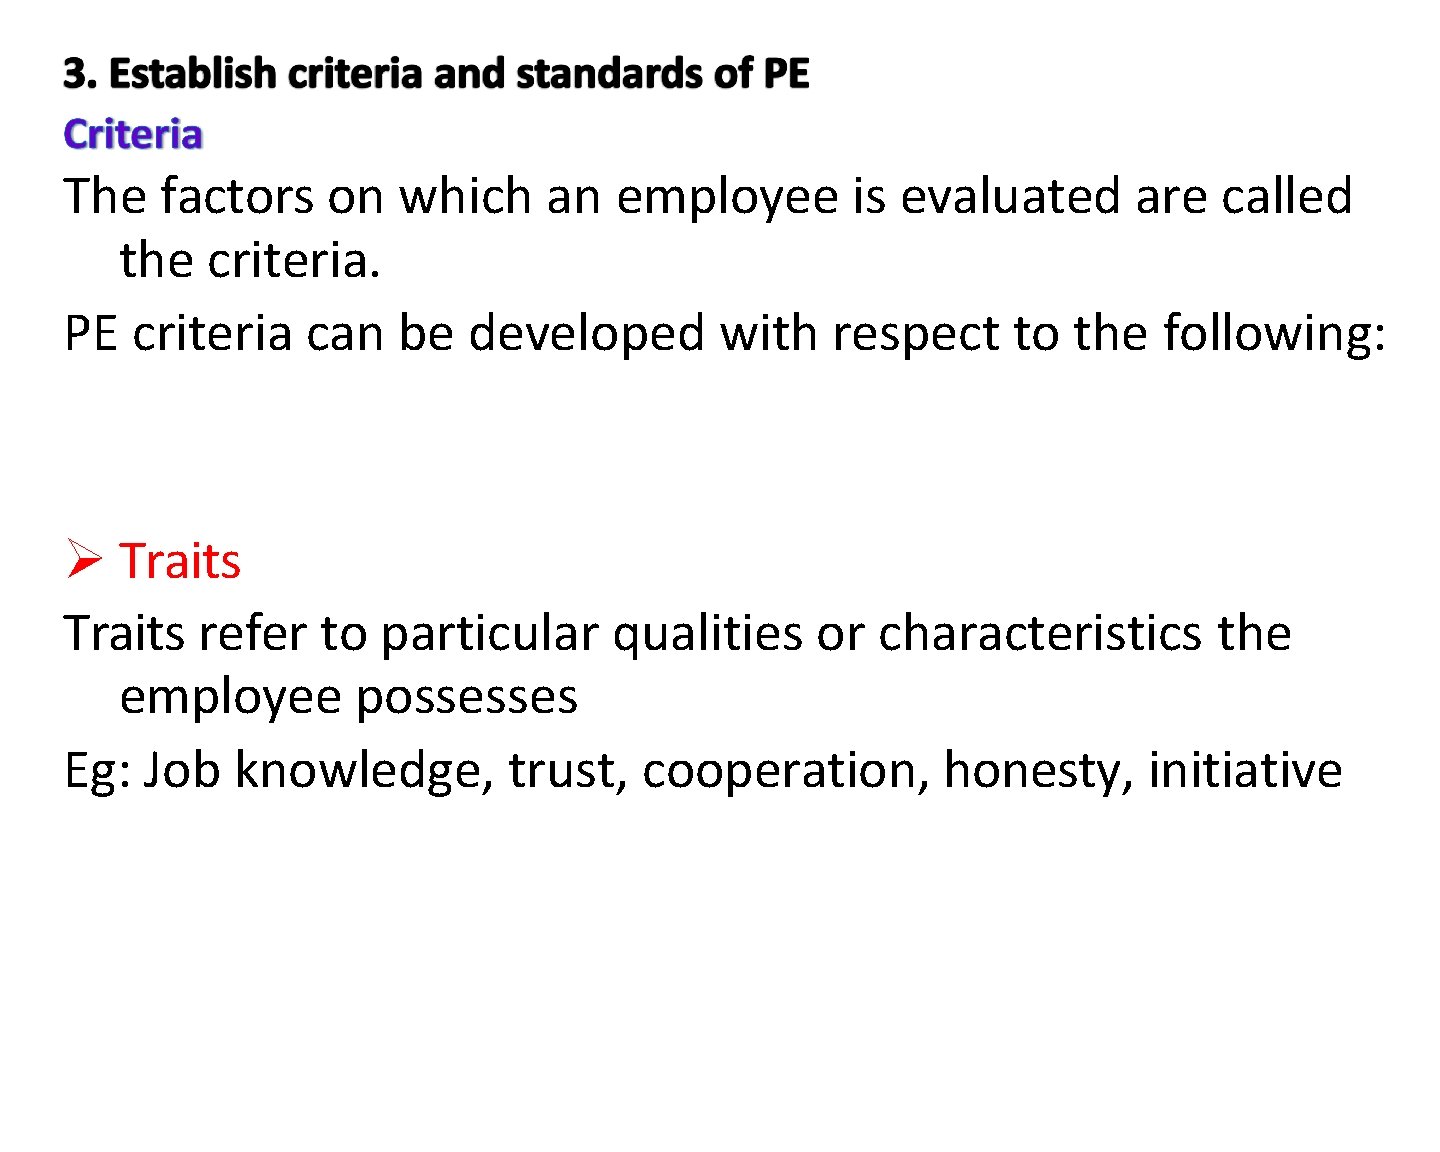 The factors on which an employee is evaluated are called the criteria. PE criteria